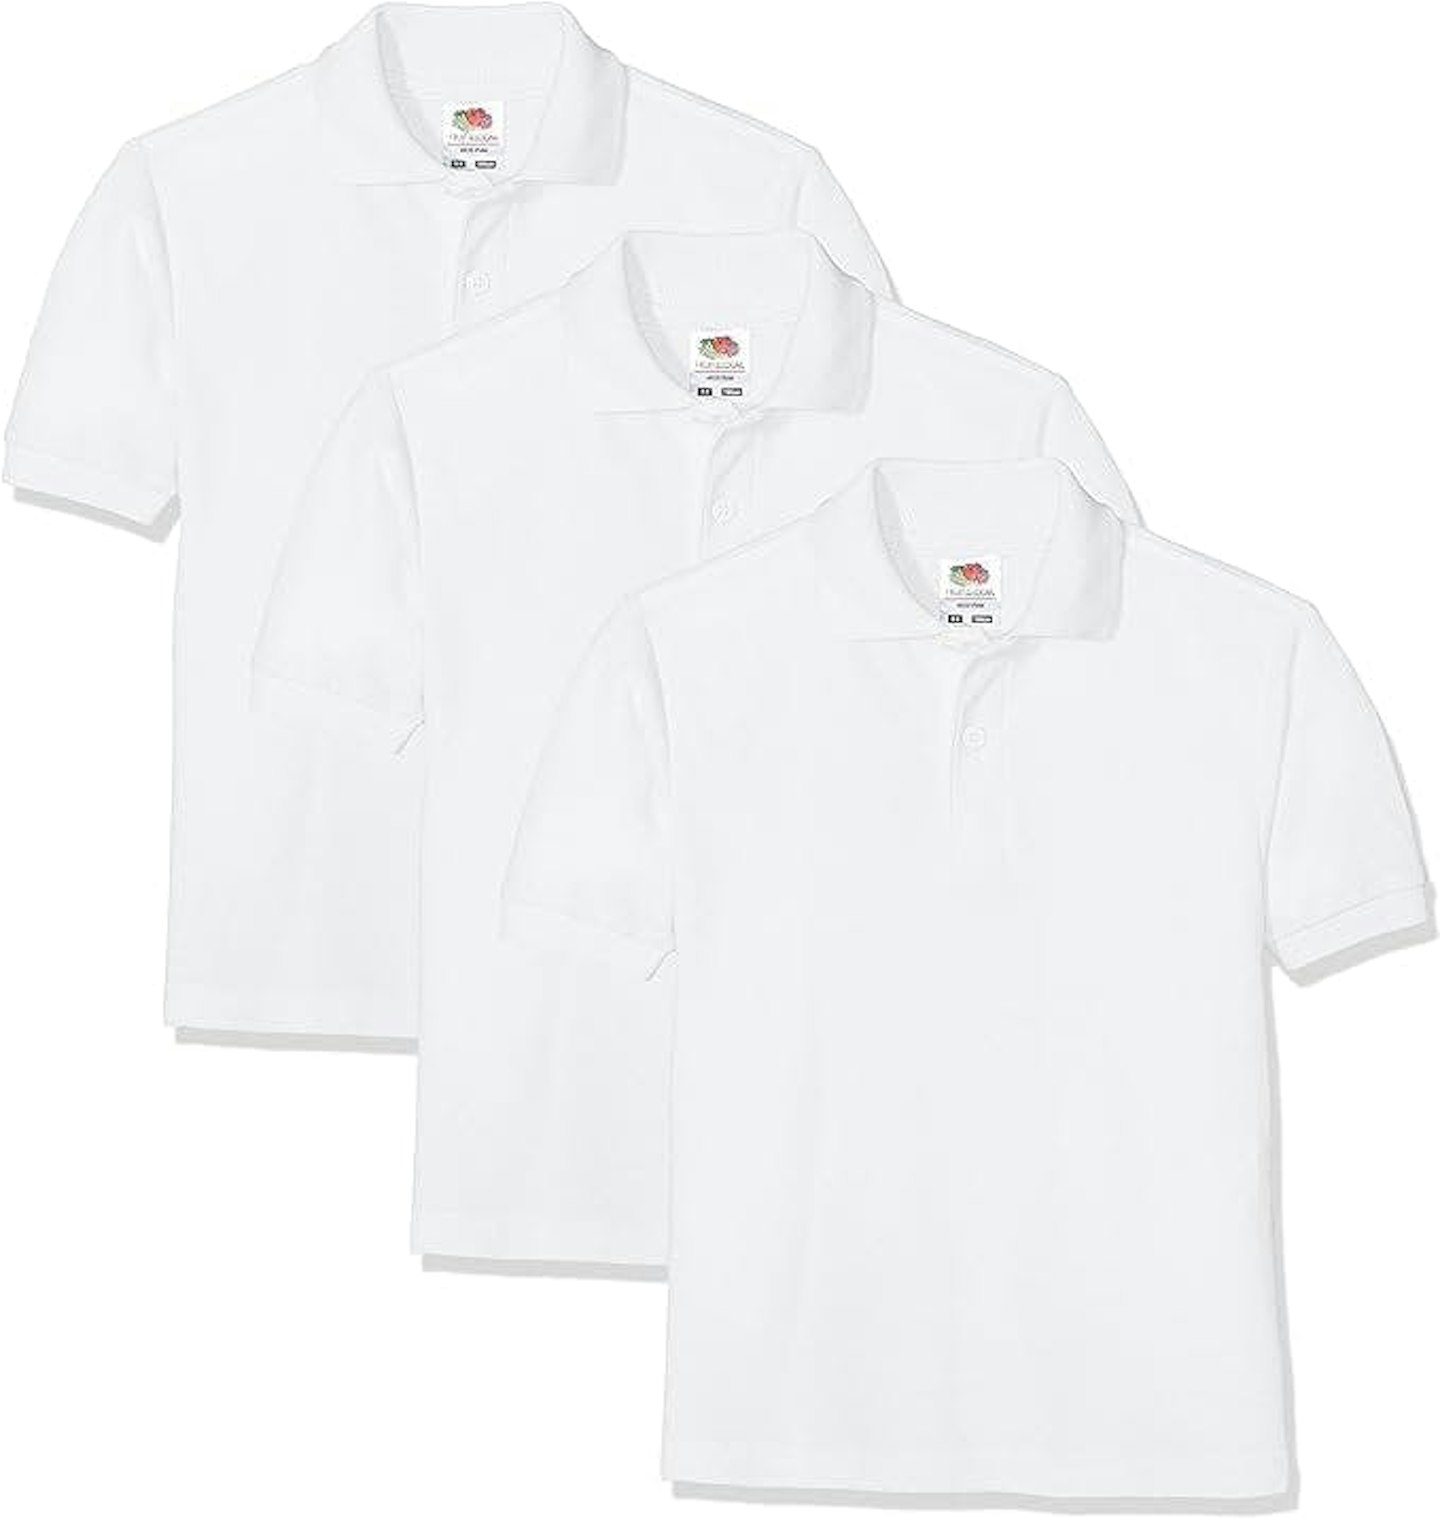 Fruit Of The Loom Short Sleeve Polo Shirt (Pack of 3)